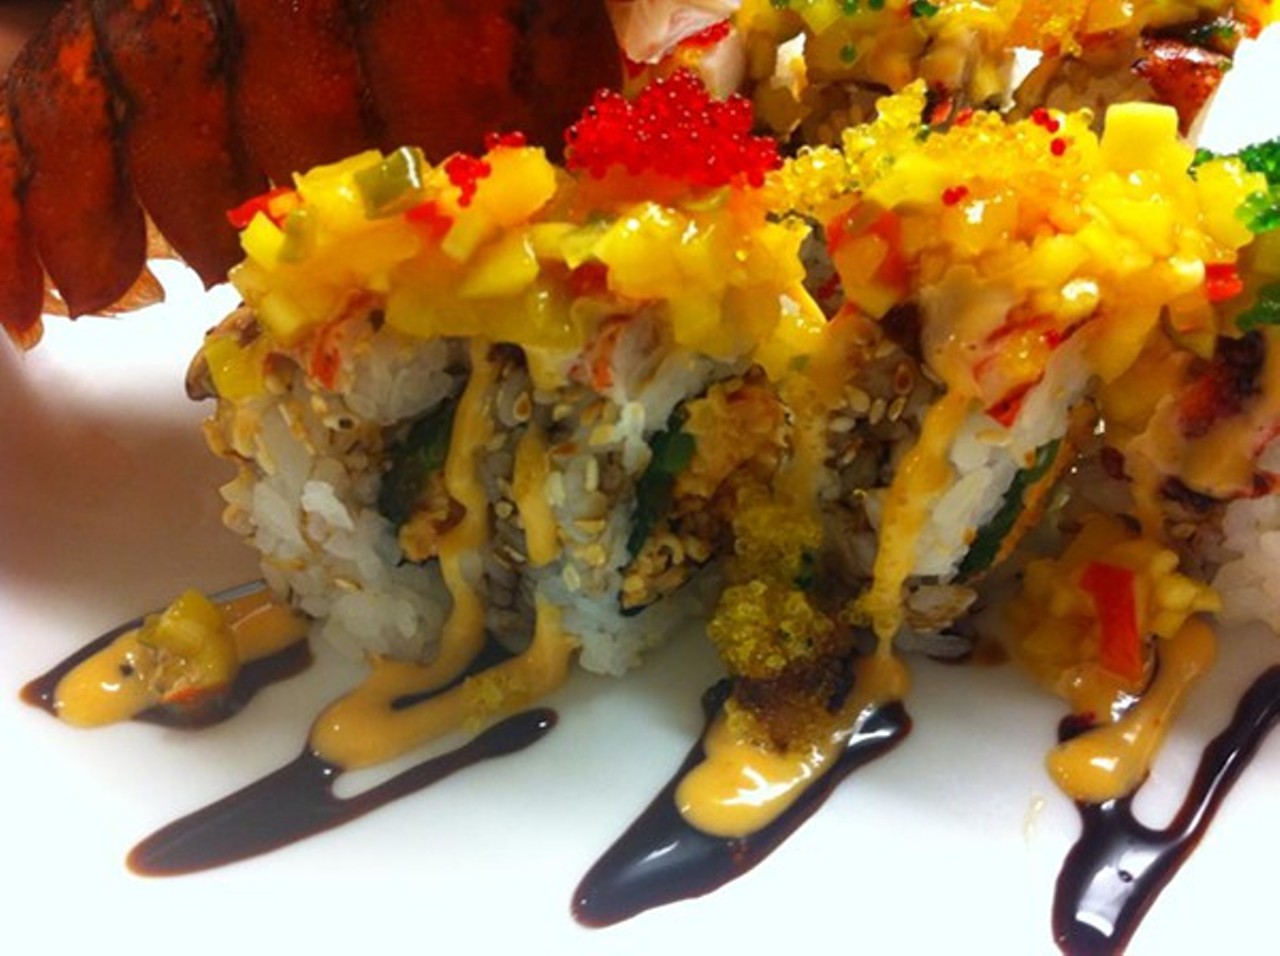 Sasa - Shaker Heights: Chef Scott Kim brings real deal sushi to Shaker Square. Our pick is the Green Dragon Roll, Alaskan king crab,eel and tempura crunch topped with avocado and unagi sauce.